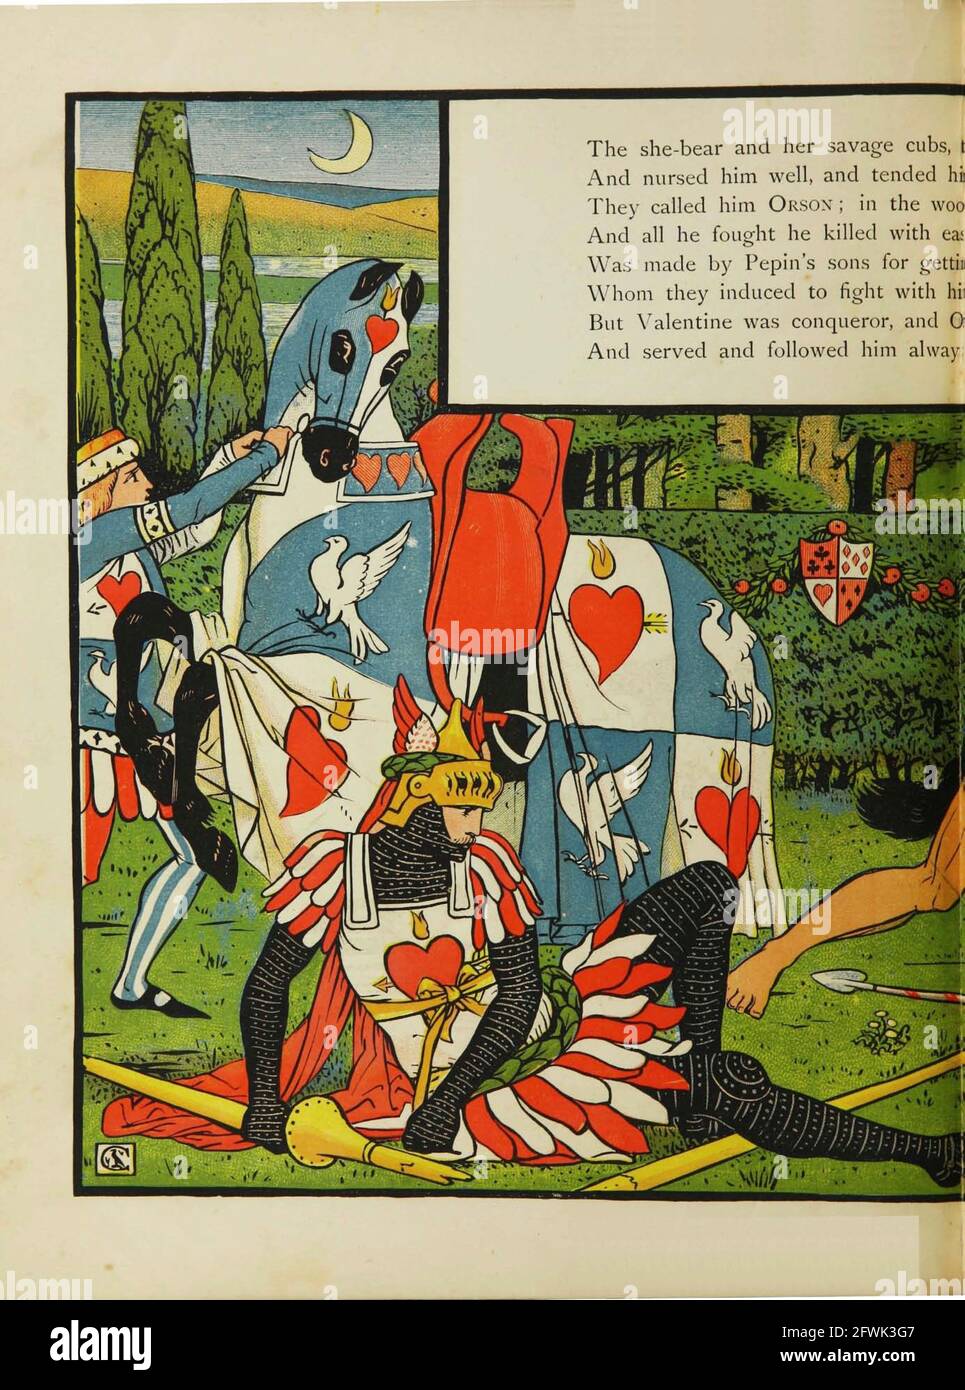 Valentine and Orson From the Book The Marquis of Carabas' picture book :  containing Puss in Boots, Old Mother Hubbard, Valentine and Orson, the  absurd ABC. Illustrated by Walter Crane, Edmund Evans,